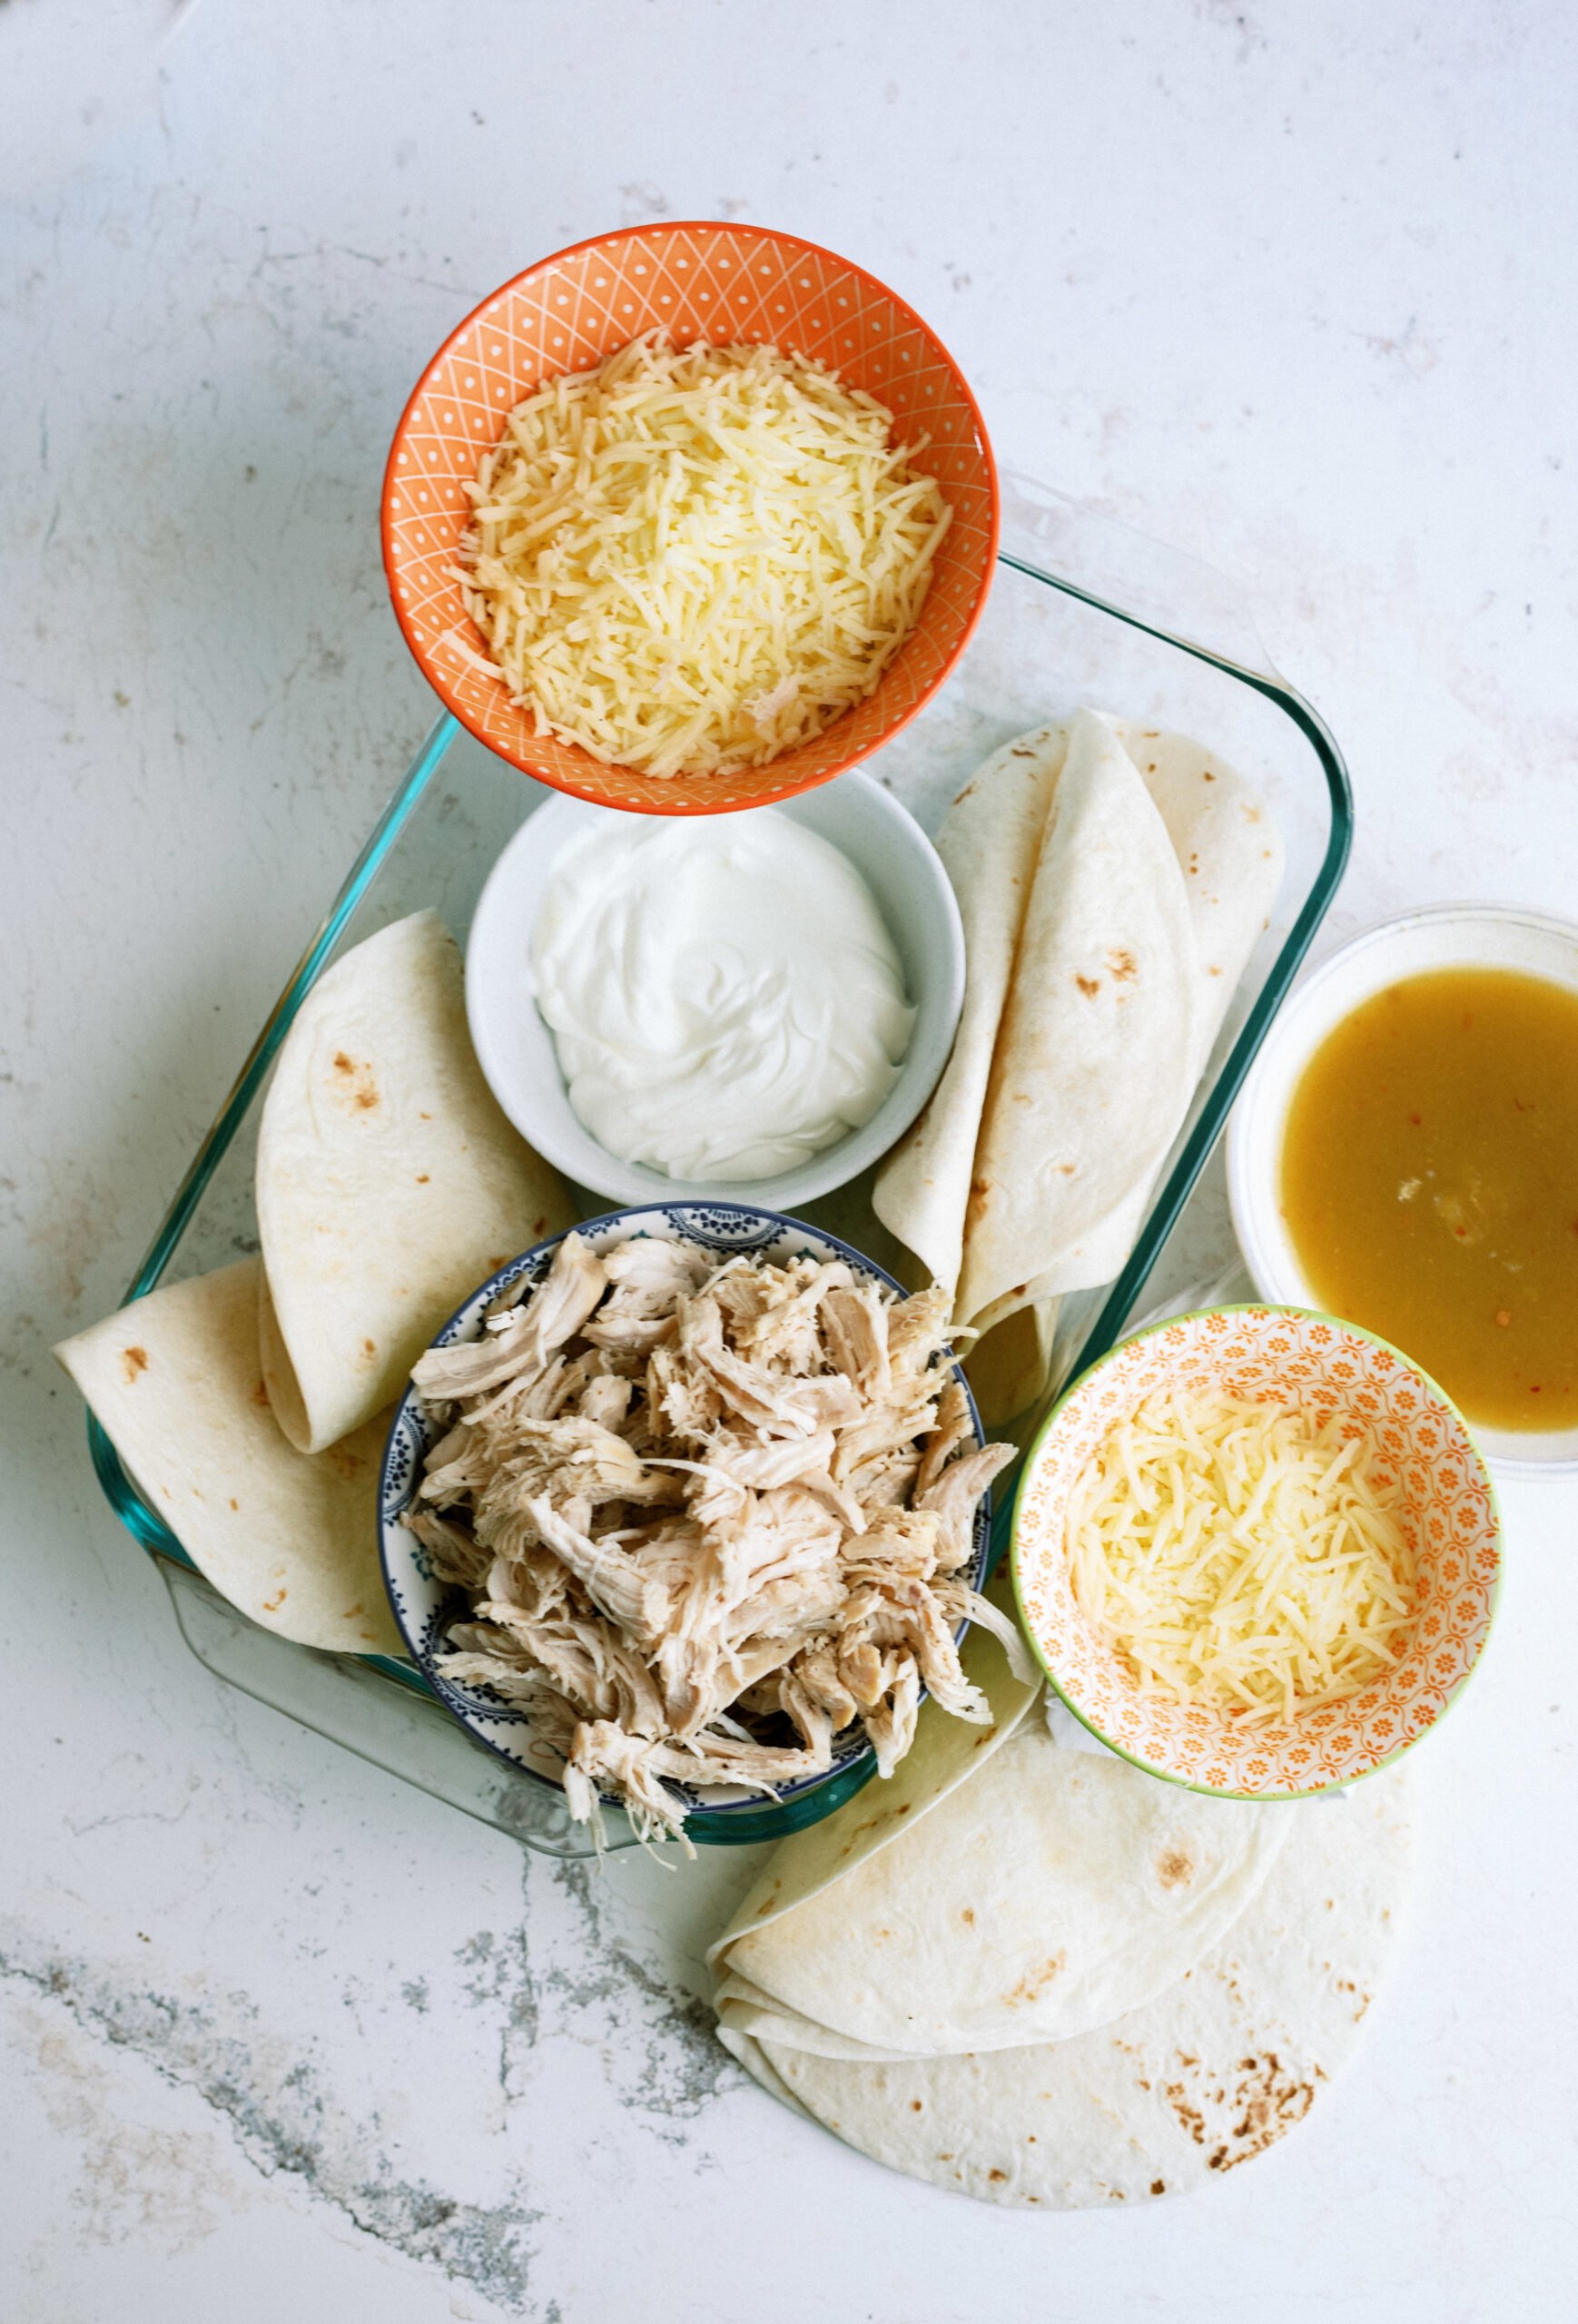 the raw ingredients needed to make this dish: cheese, sour cream, tortillas, green enchilada sauce, cooked chicken